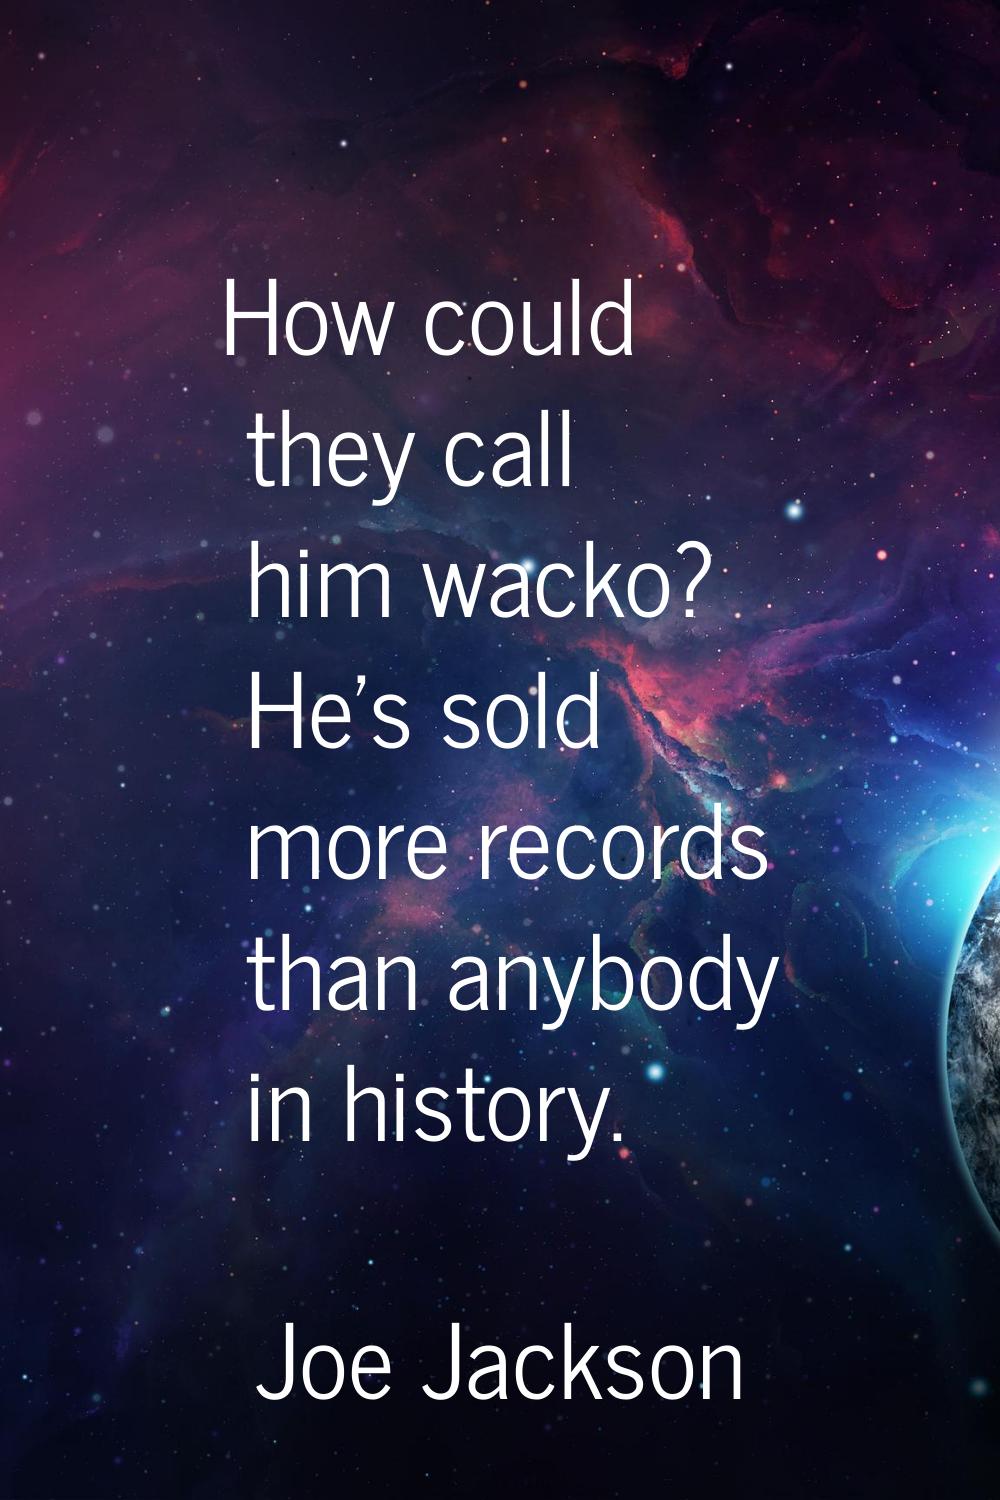 How could they call him wacko? He's sold more records than anybody in history.